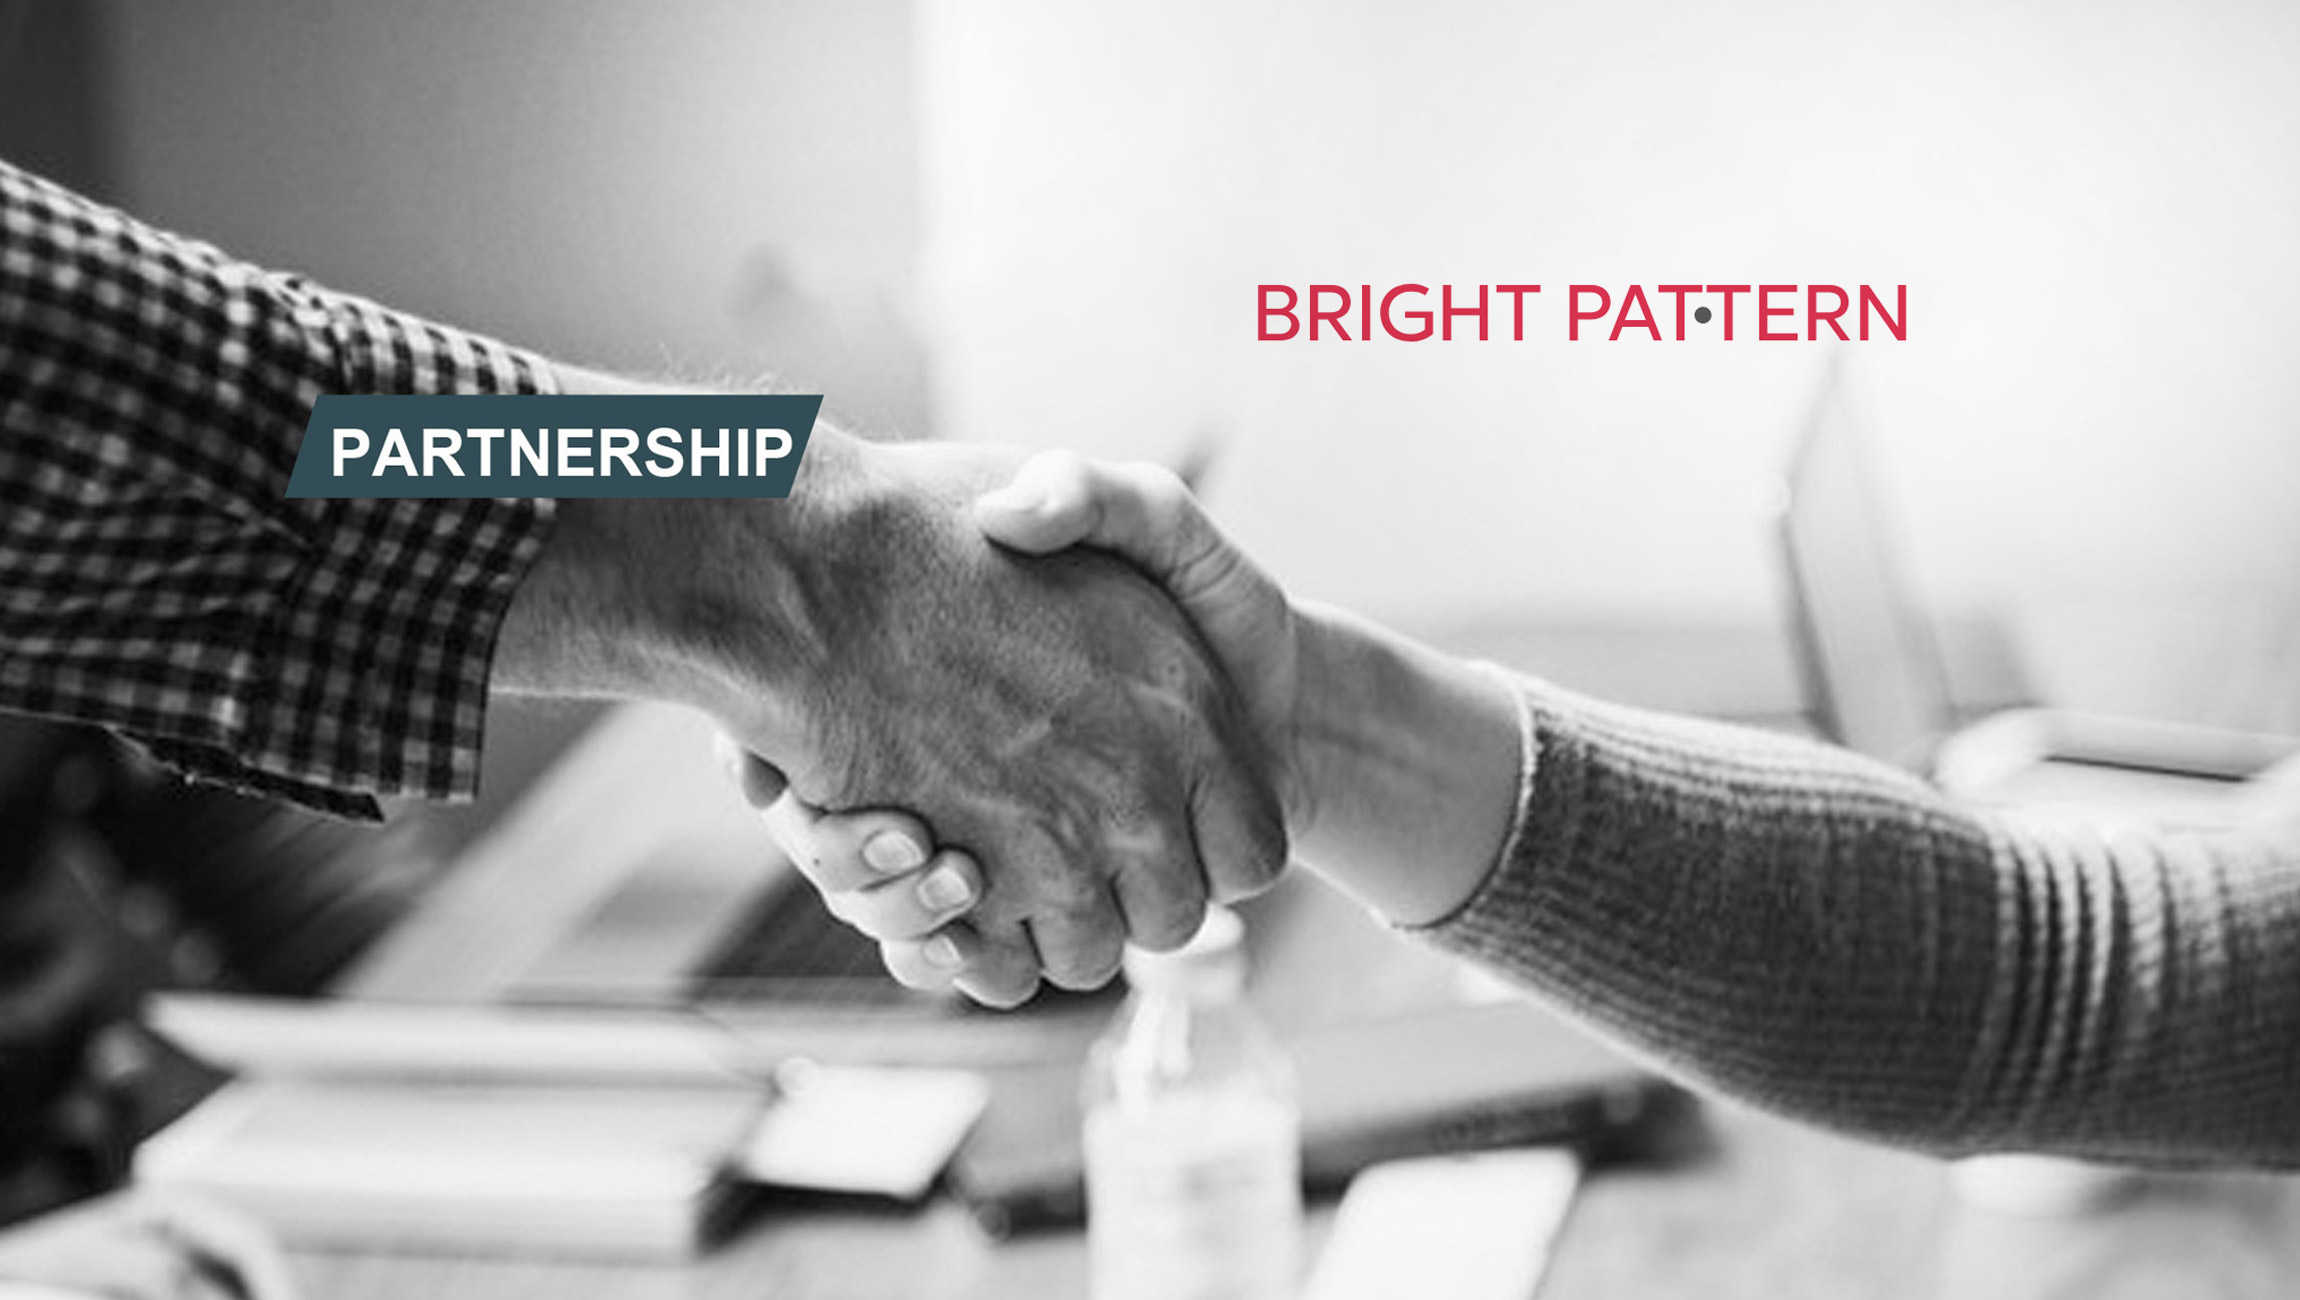 Next Leadership Development Corporation Partners with Bright Pattern to Create Community Communications Center Supporting Black Boston Residents